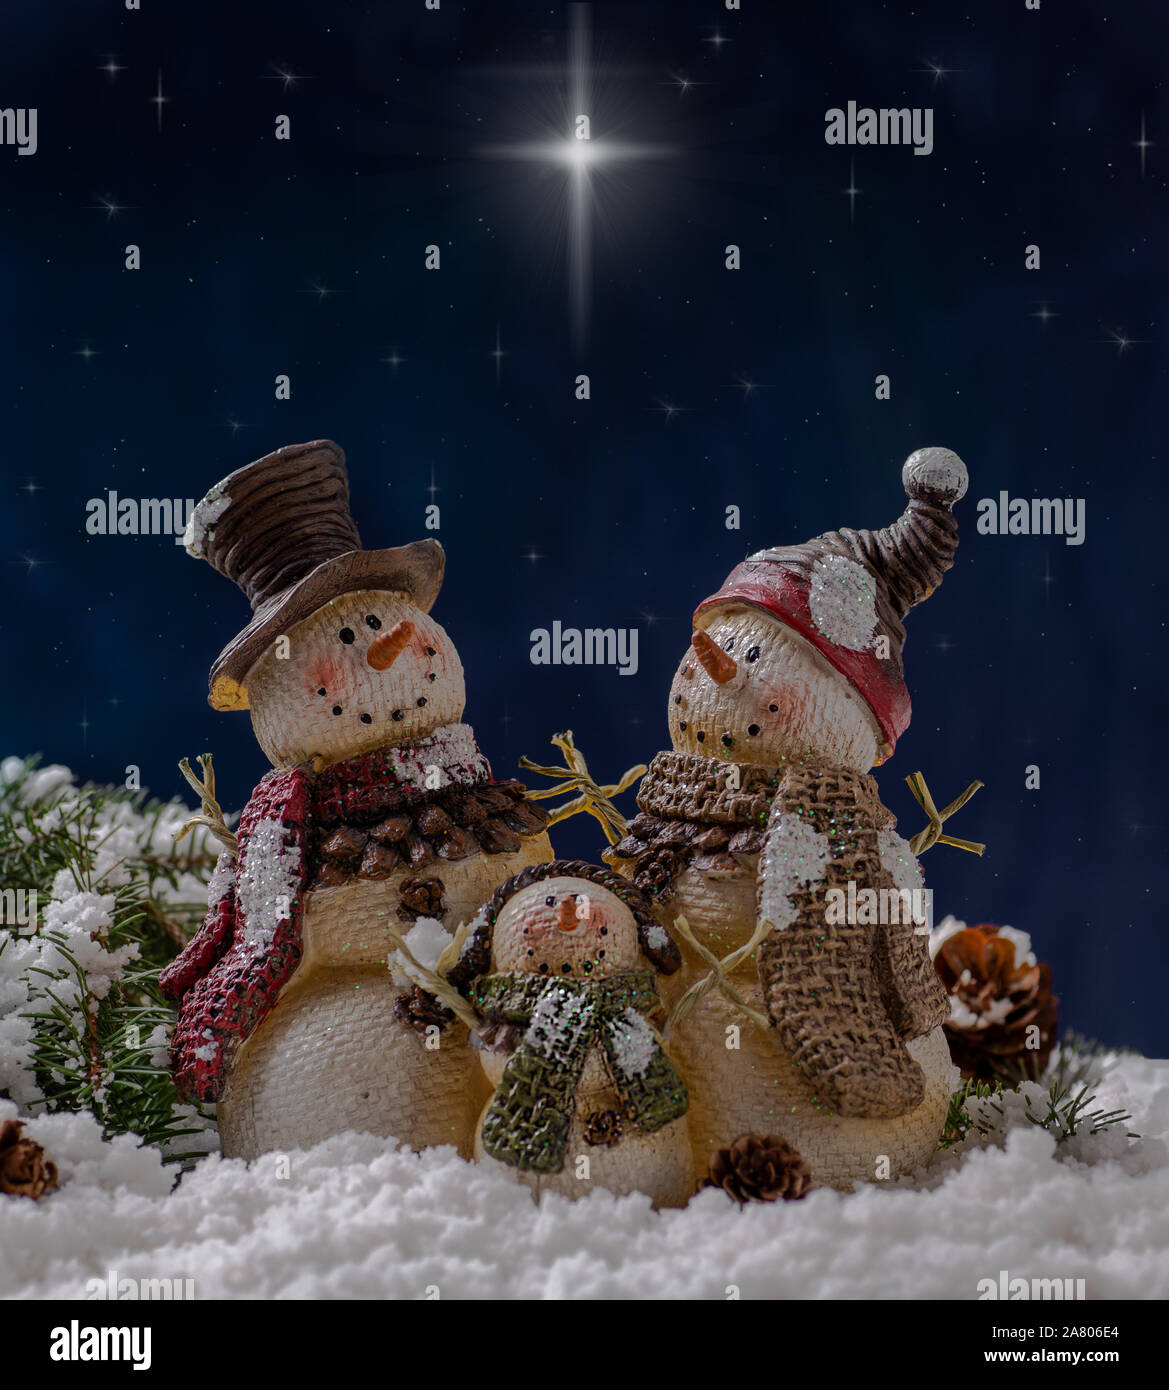 Holiday snowmen figurines on snowy surface against a night sky background with shining stars Stock Photo